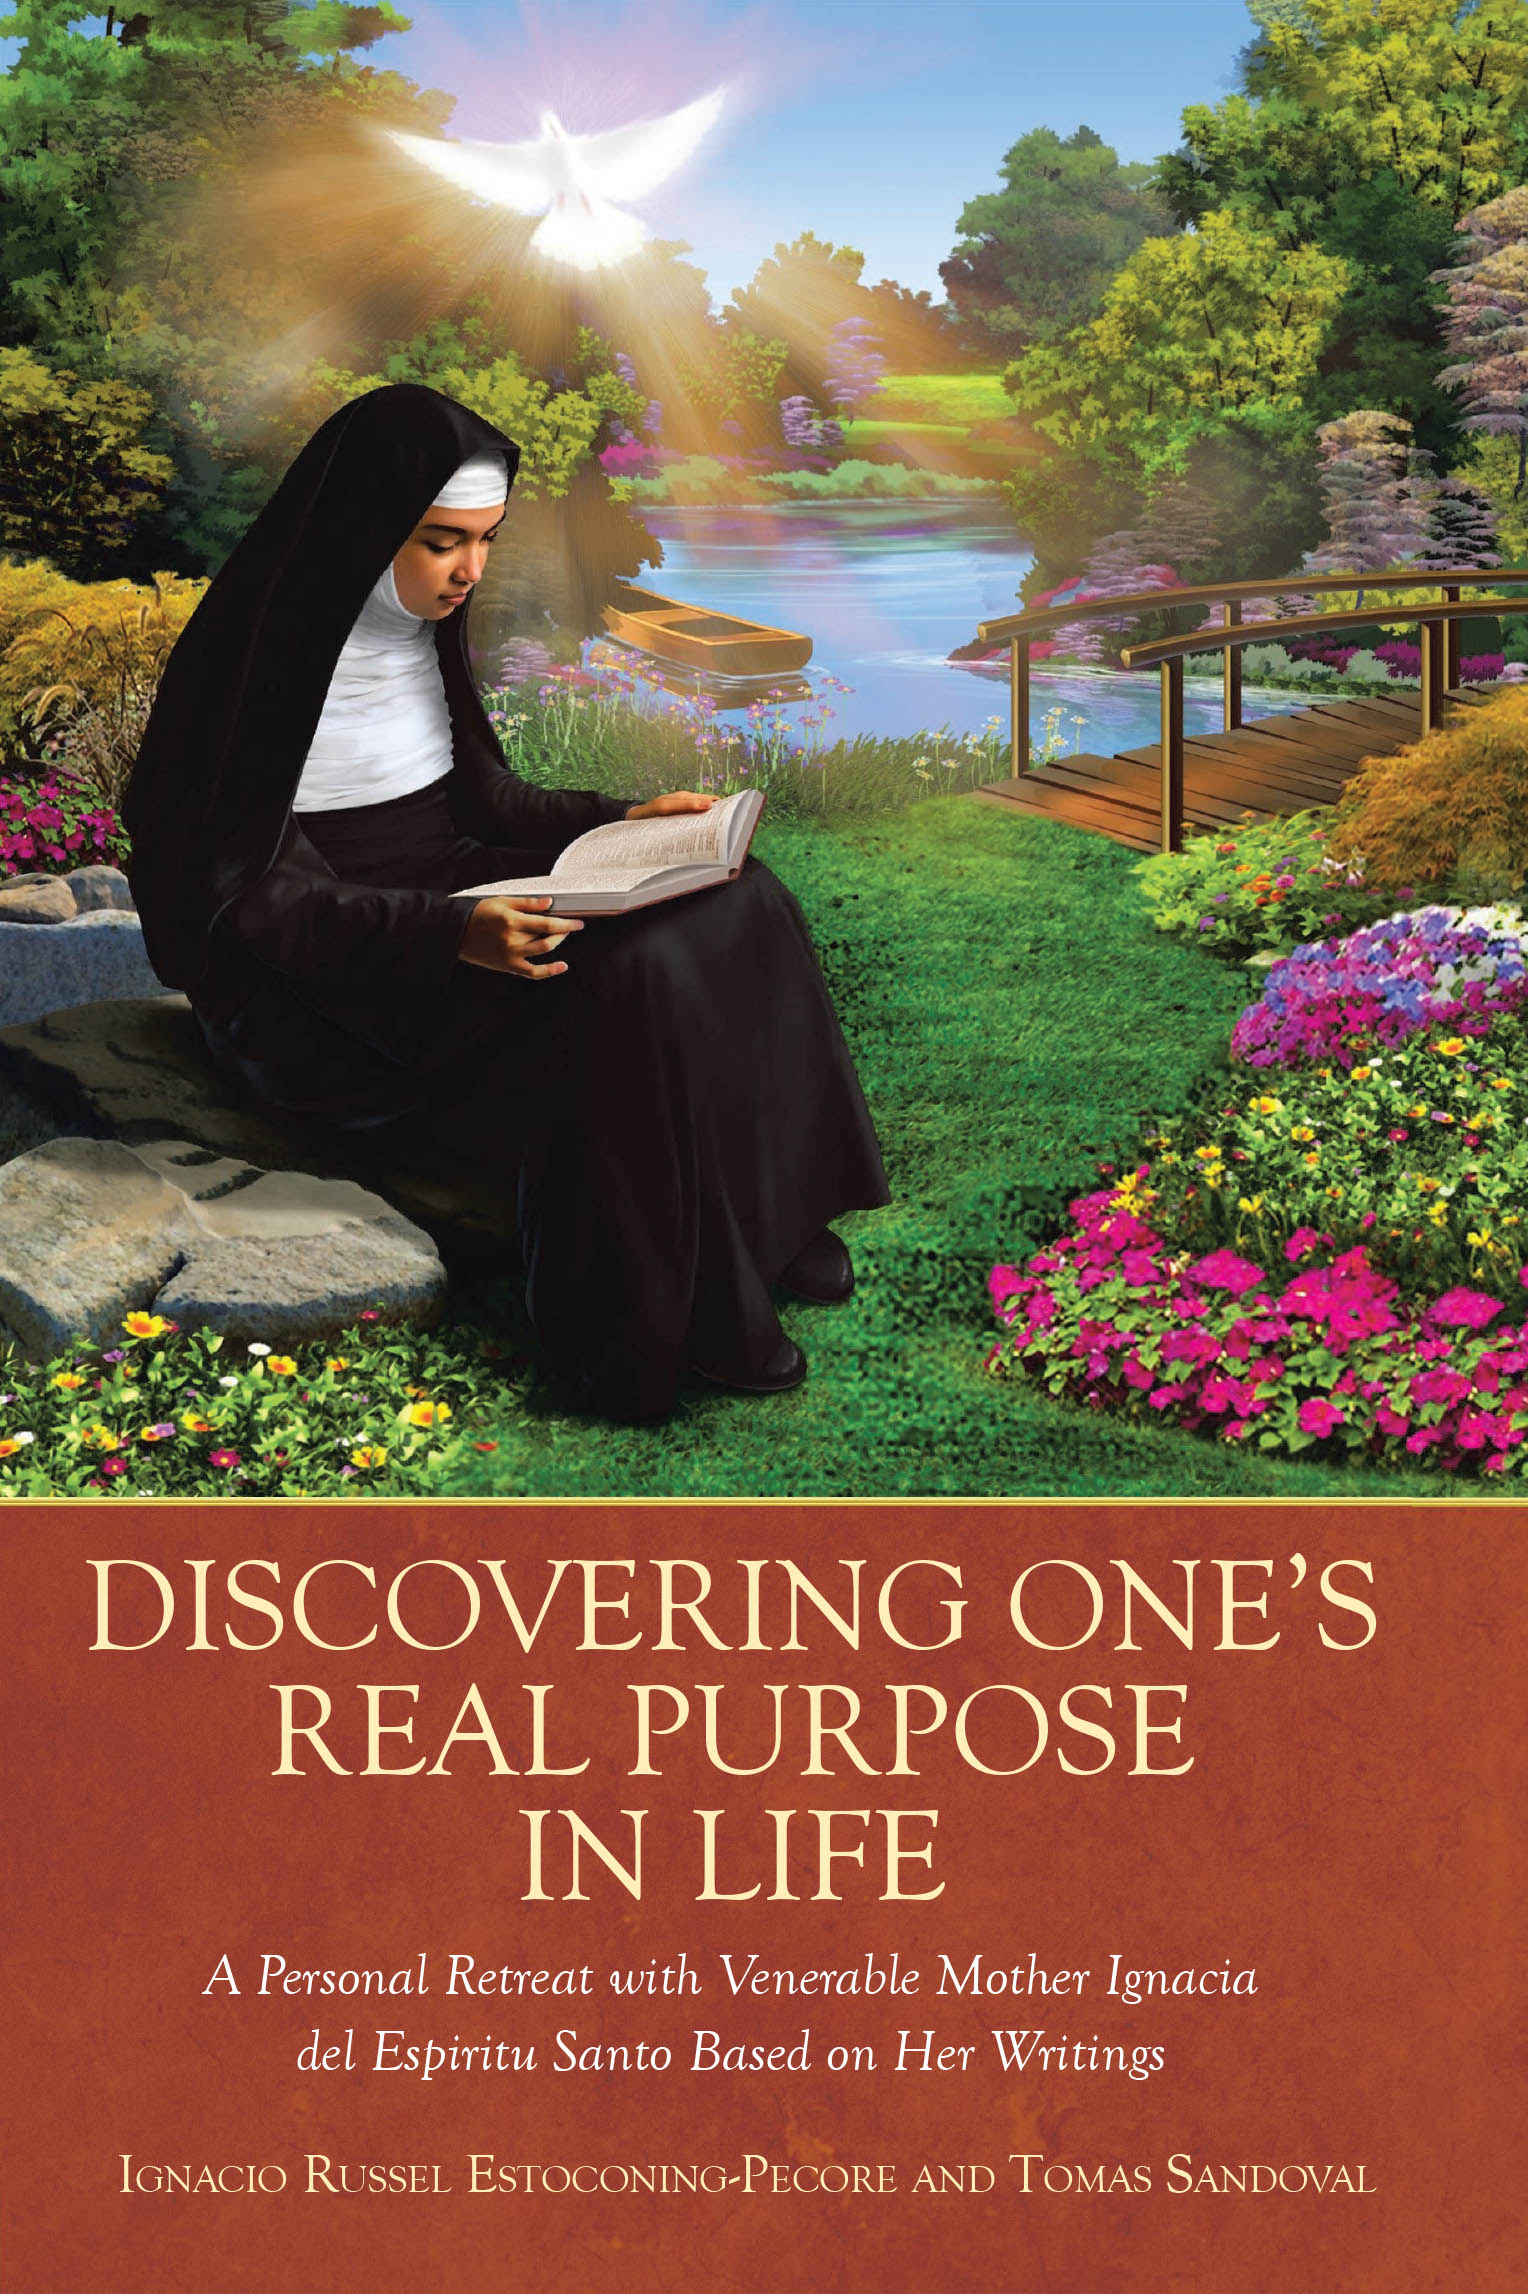 Ignacio Russel Estoconing-Pecore and Tomas Sandoval’s Newly Released "Discovering One’s Real Purpose in Life" is an Enlightening Spiritual Guide